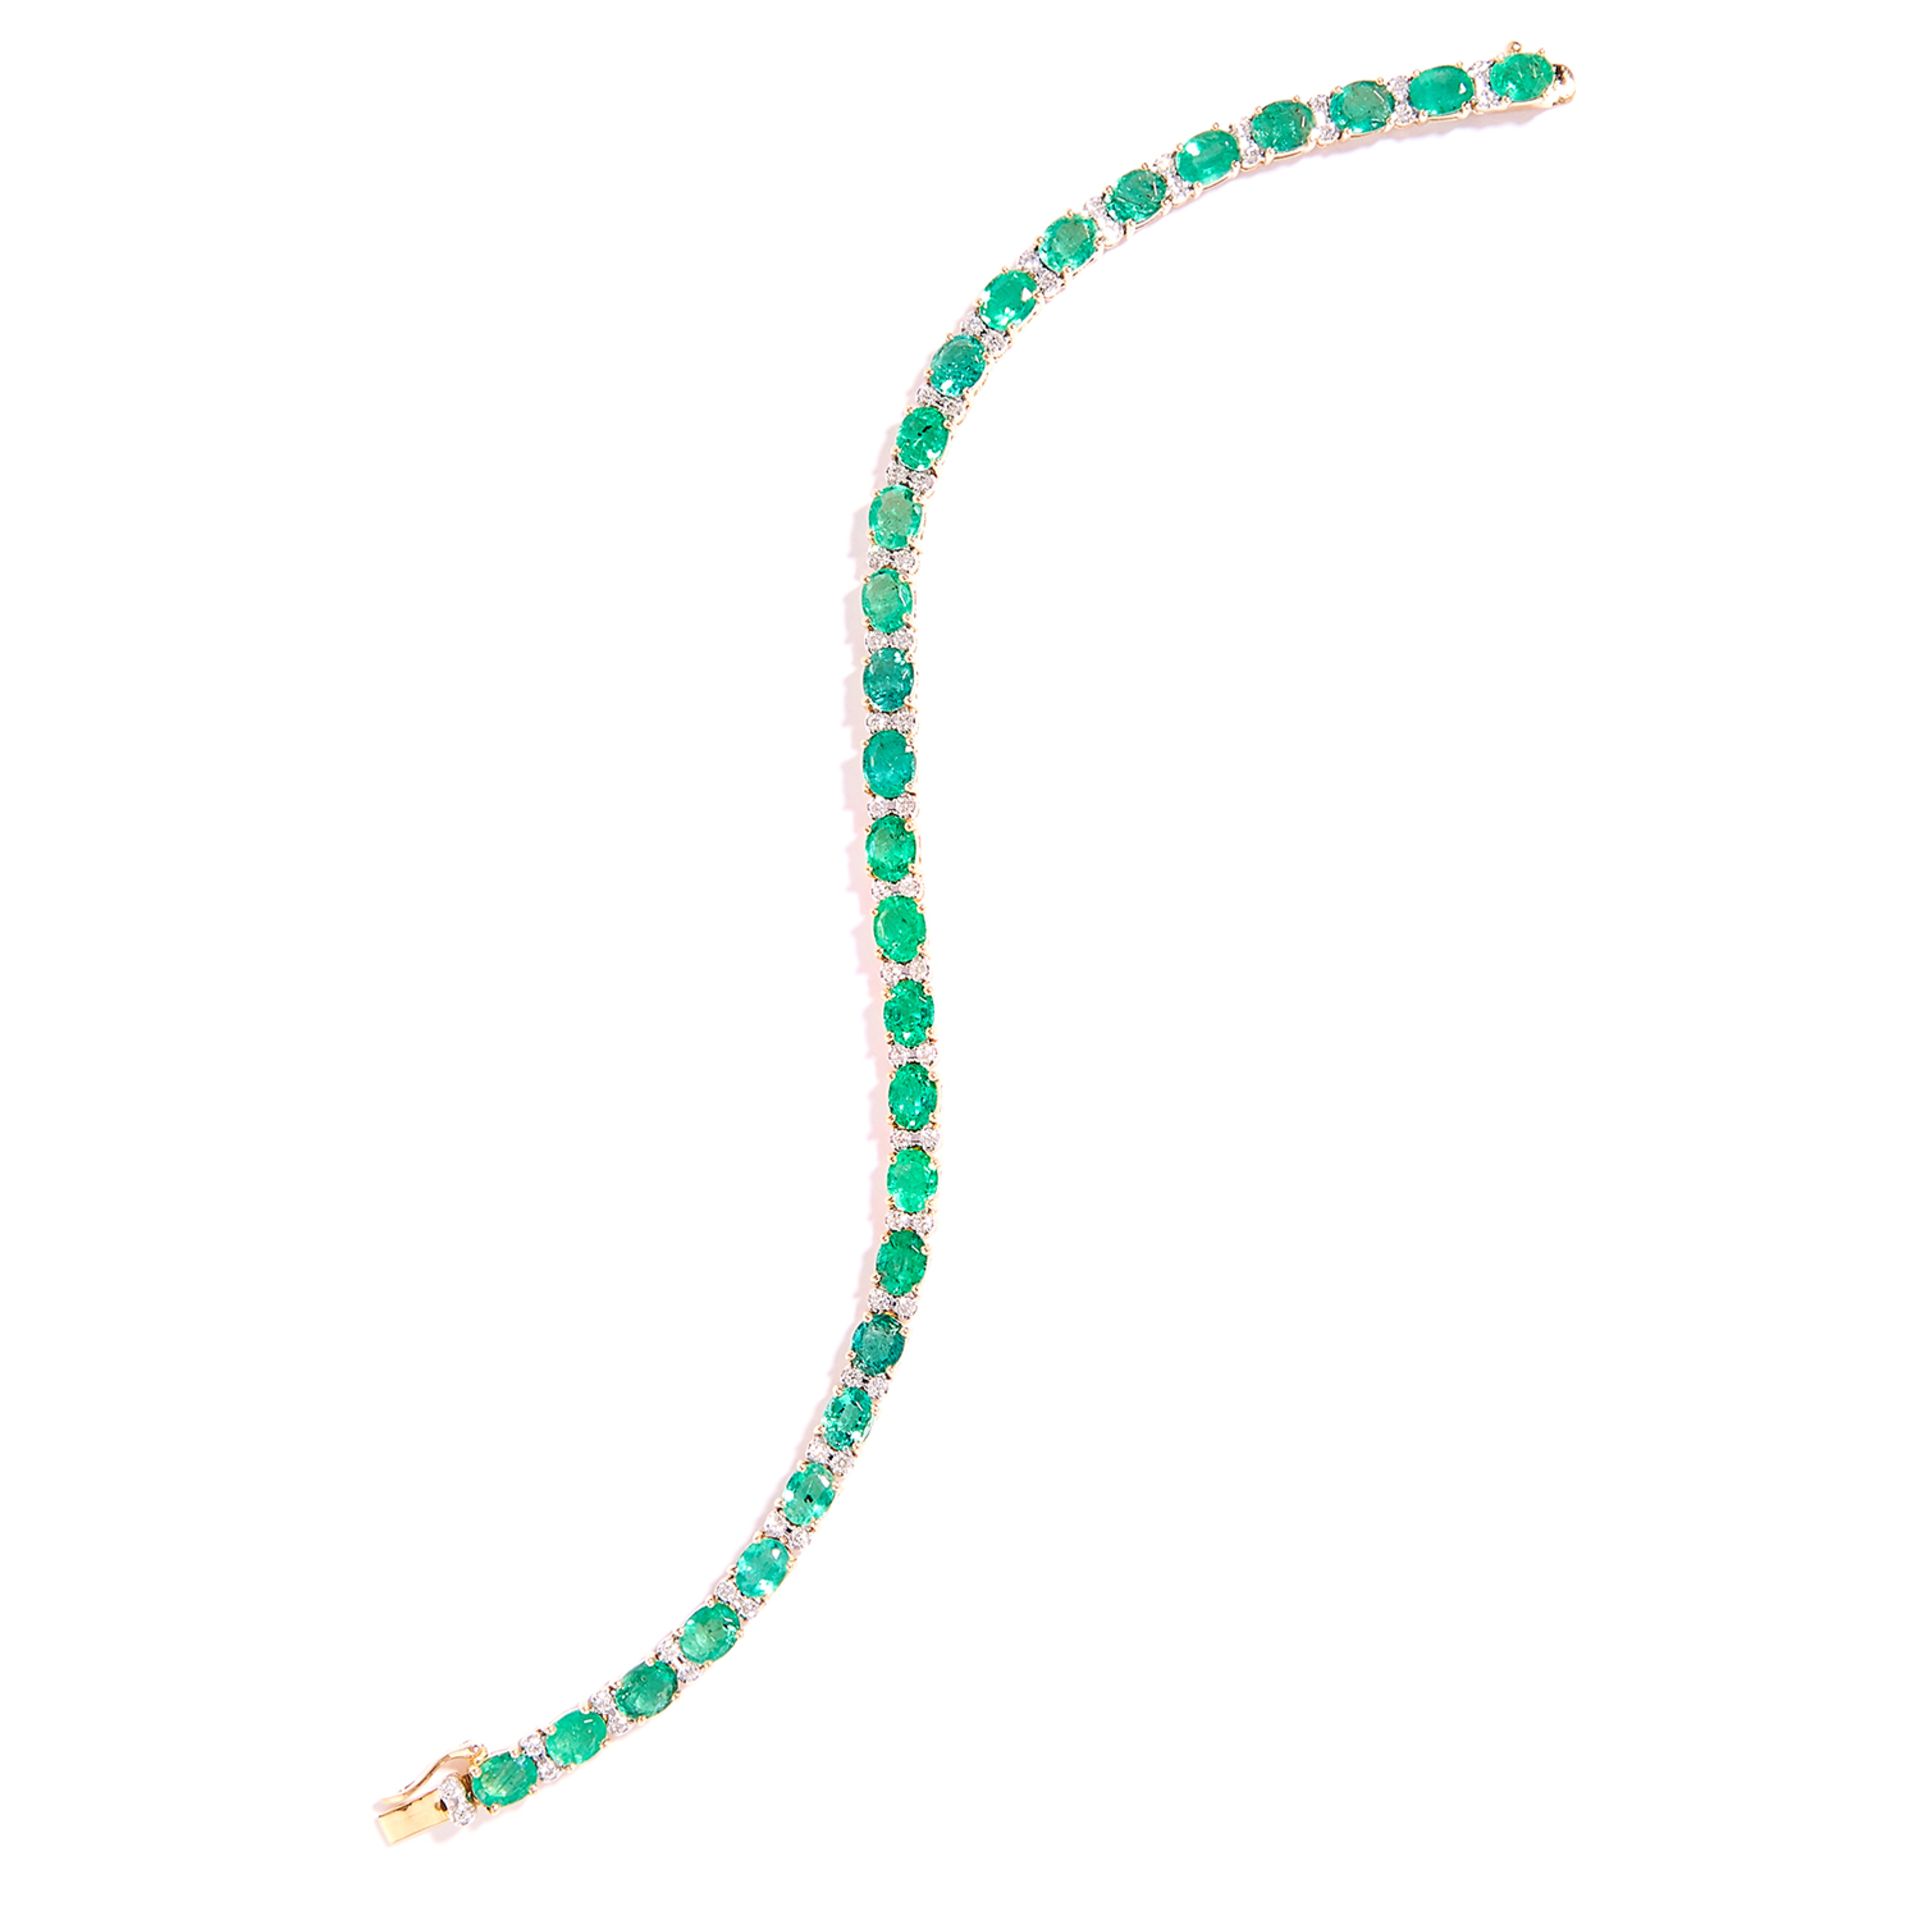 EMERALD AND DIAMOND LINE BRACELET in 18ct yellow gold, set with oval cut emeralds totalling